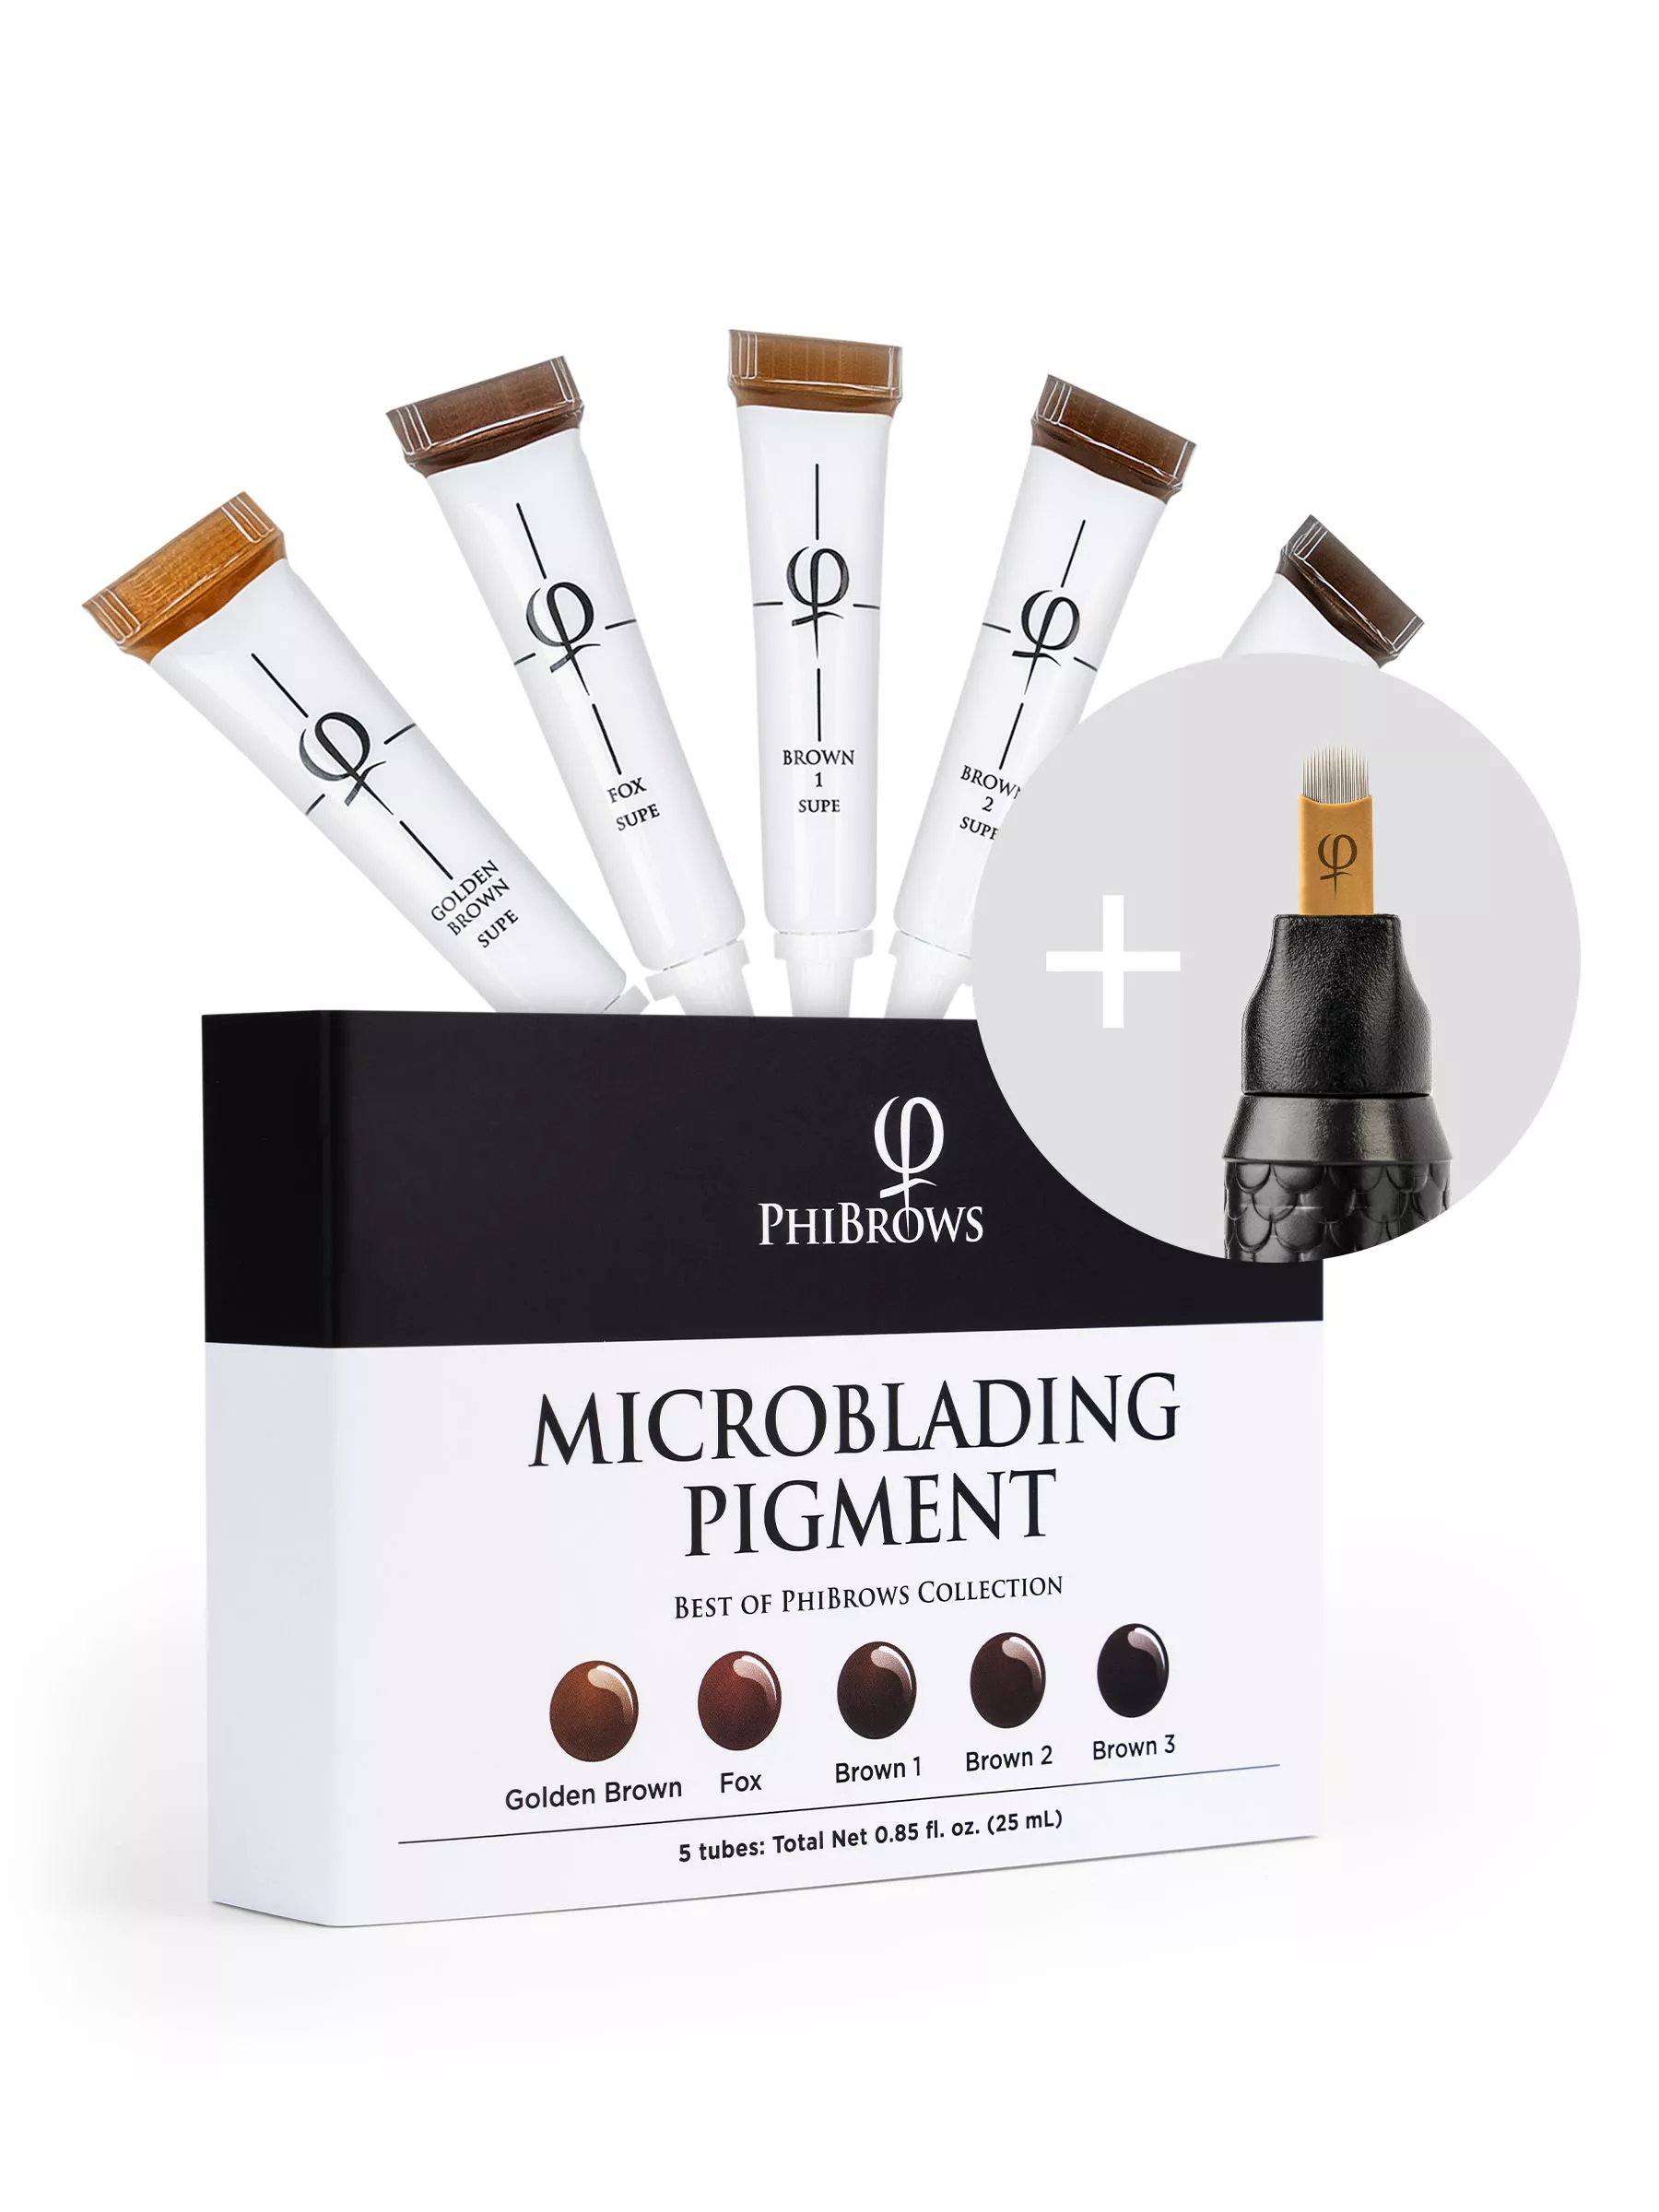 PhiBrows Microblading Pigment Collection SUPE + PhiBlade Disposable Tool 18 U Ecc 0.18 20pcs